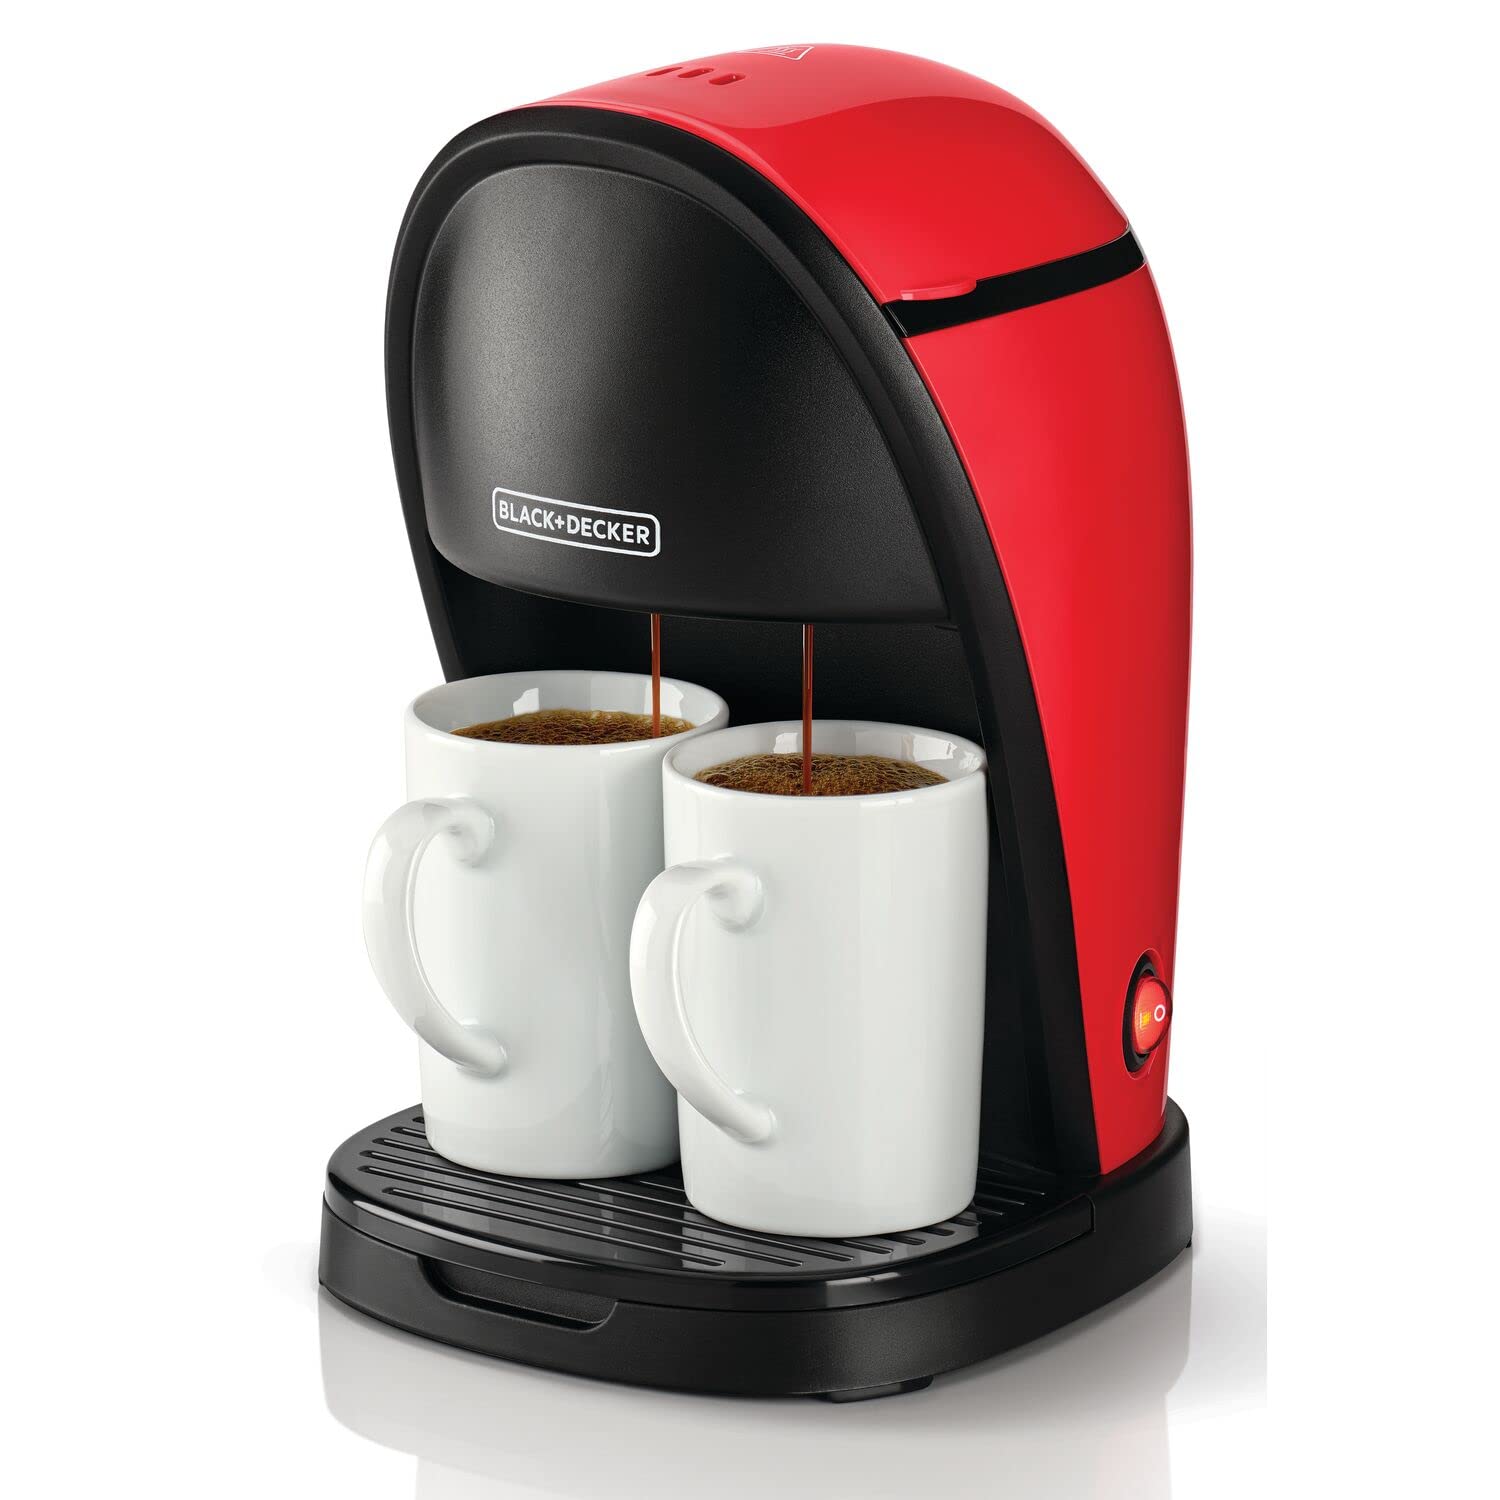 Black & Decker BLACK+DECKER 450w 2 cups coffee maker machine 250ml water tank capacity with two mugs for drip and espresso dcm48 b5 red